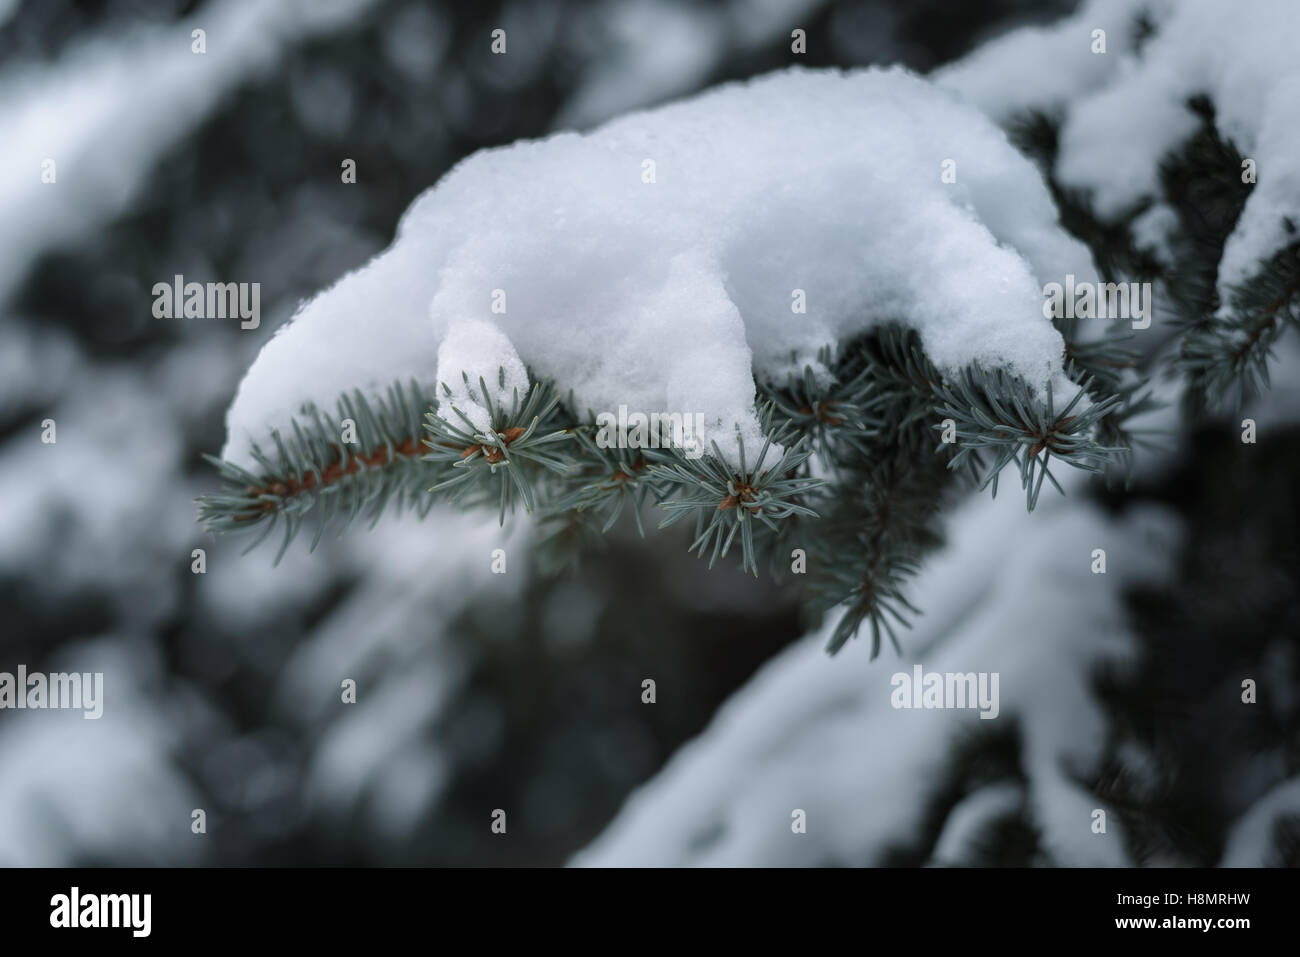 The first Snow fell on the branch, the composition on a natural background Stock Photo